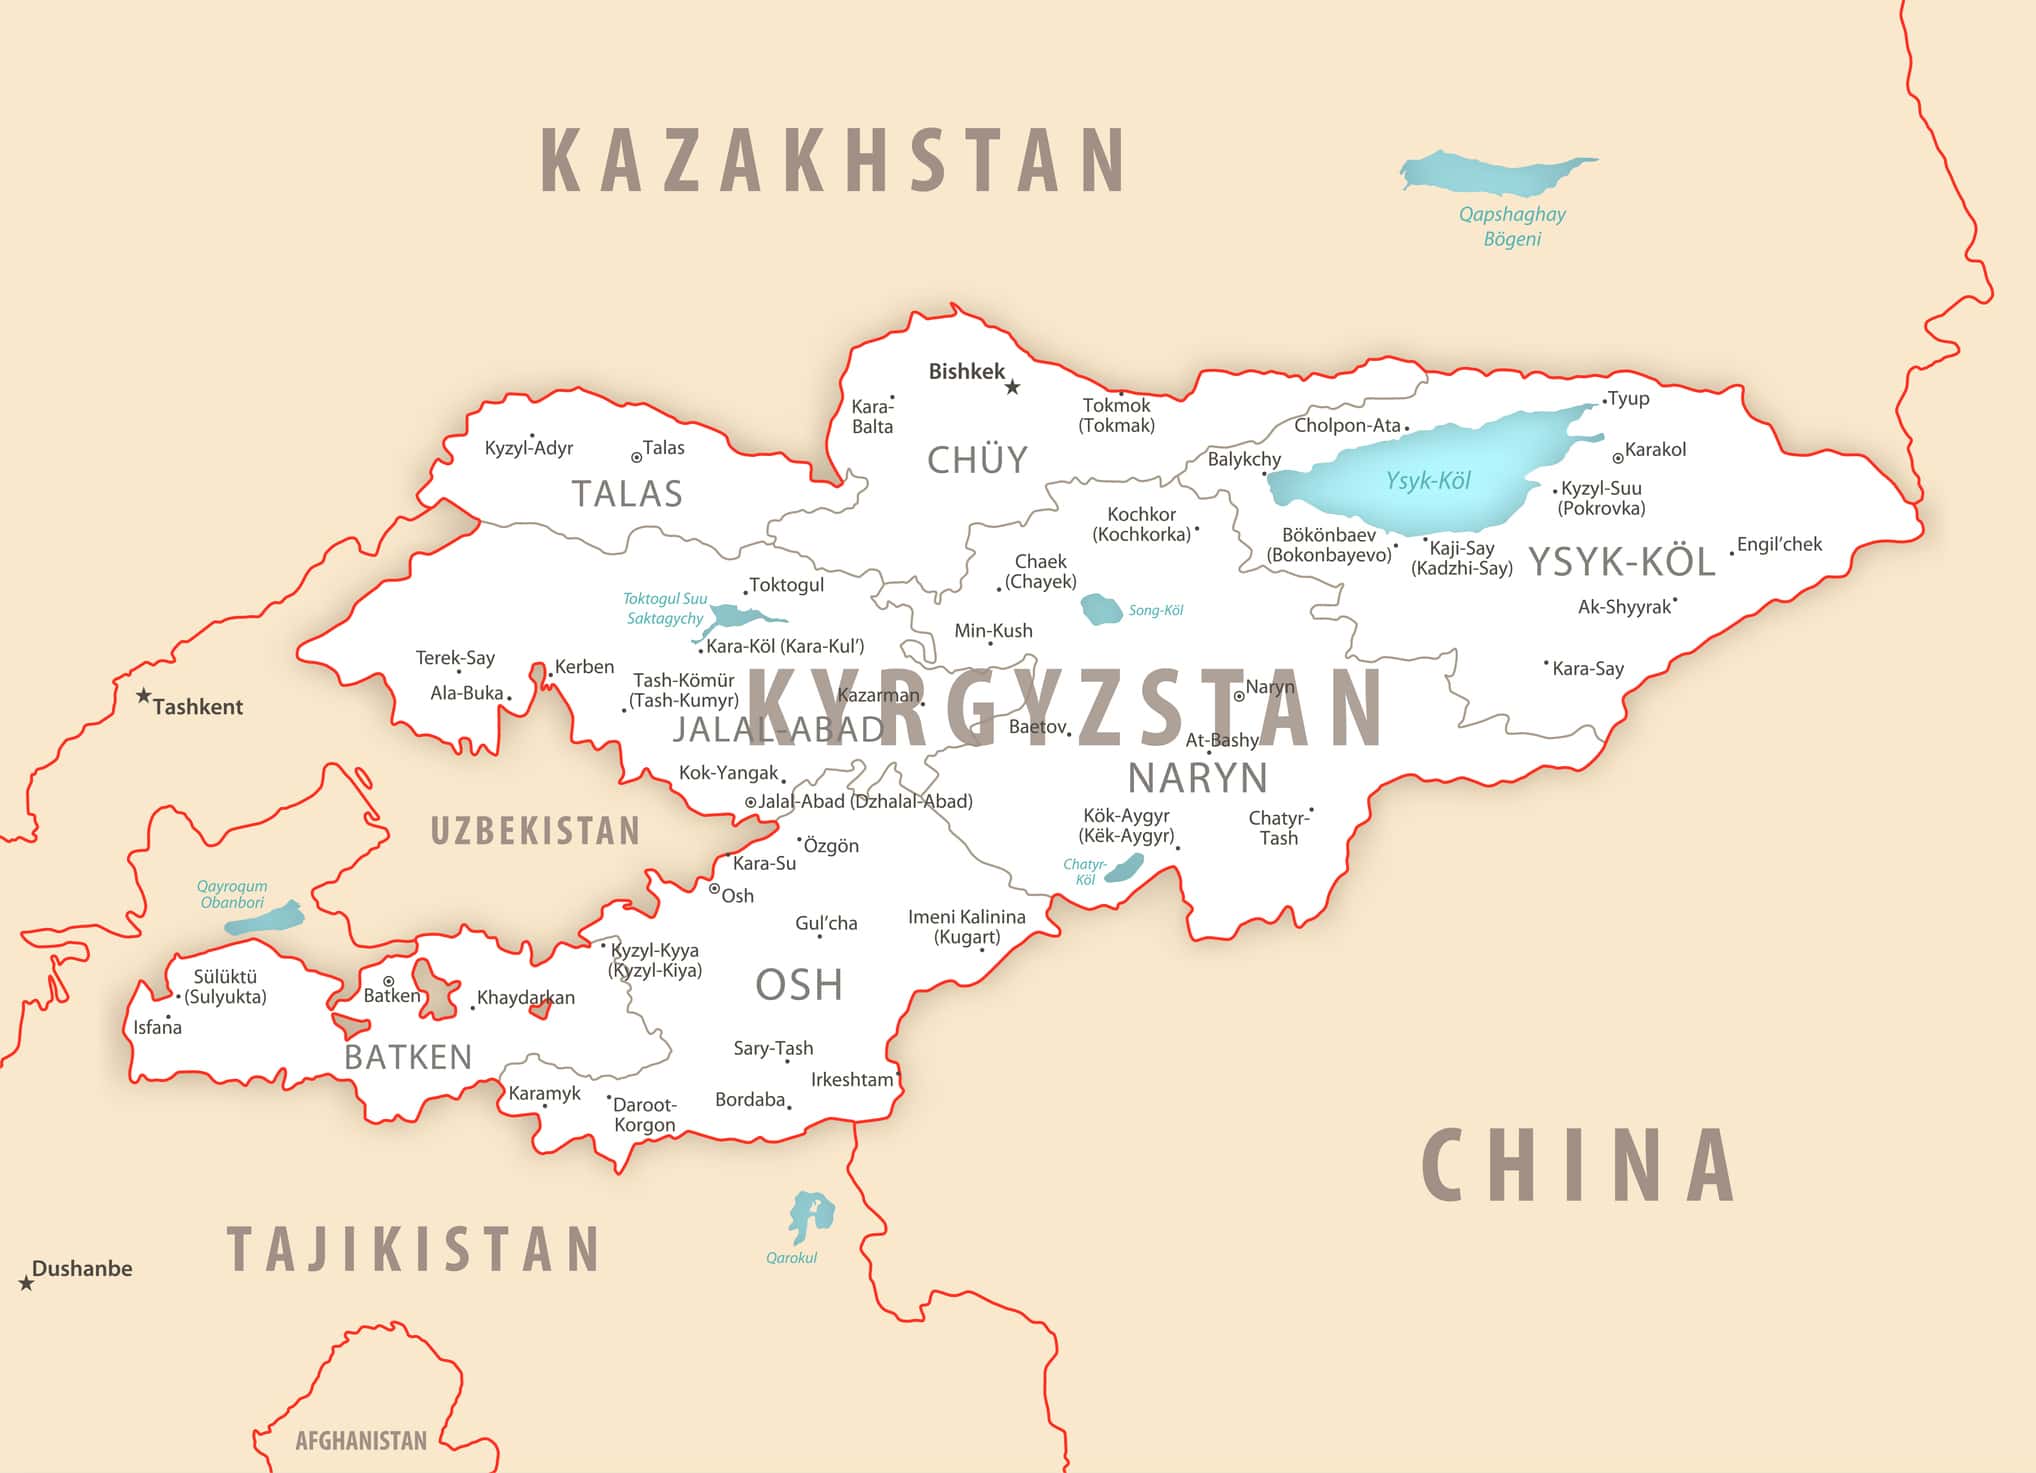 Kyrgyzstan detailed map with regions and cities of the country.